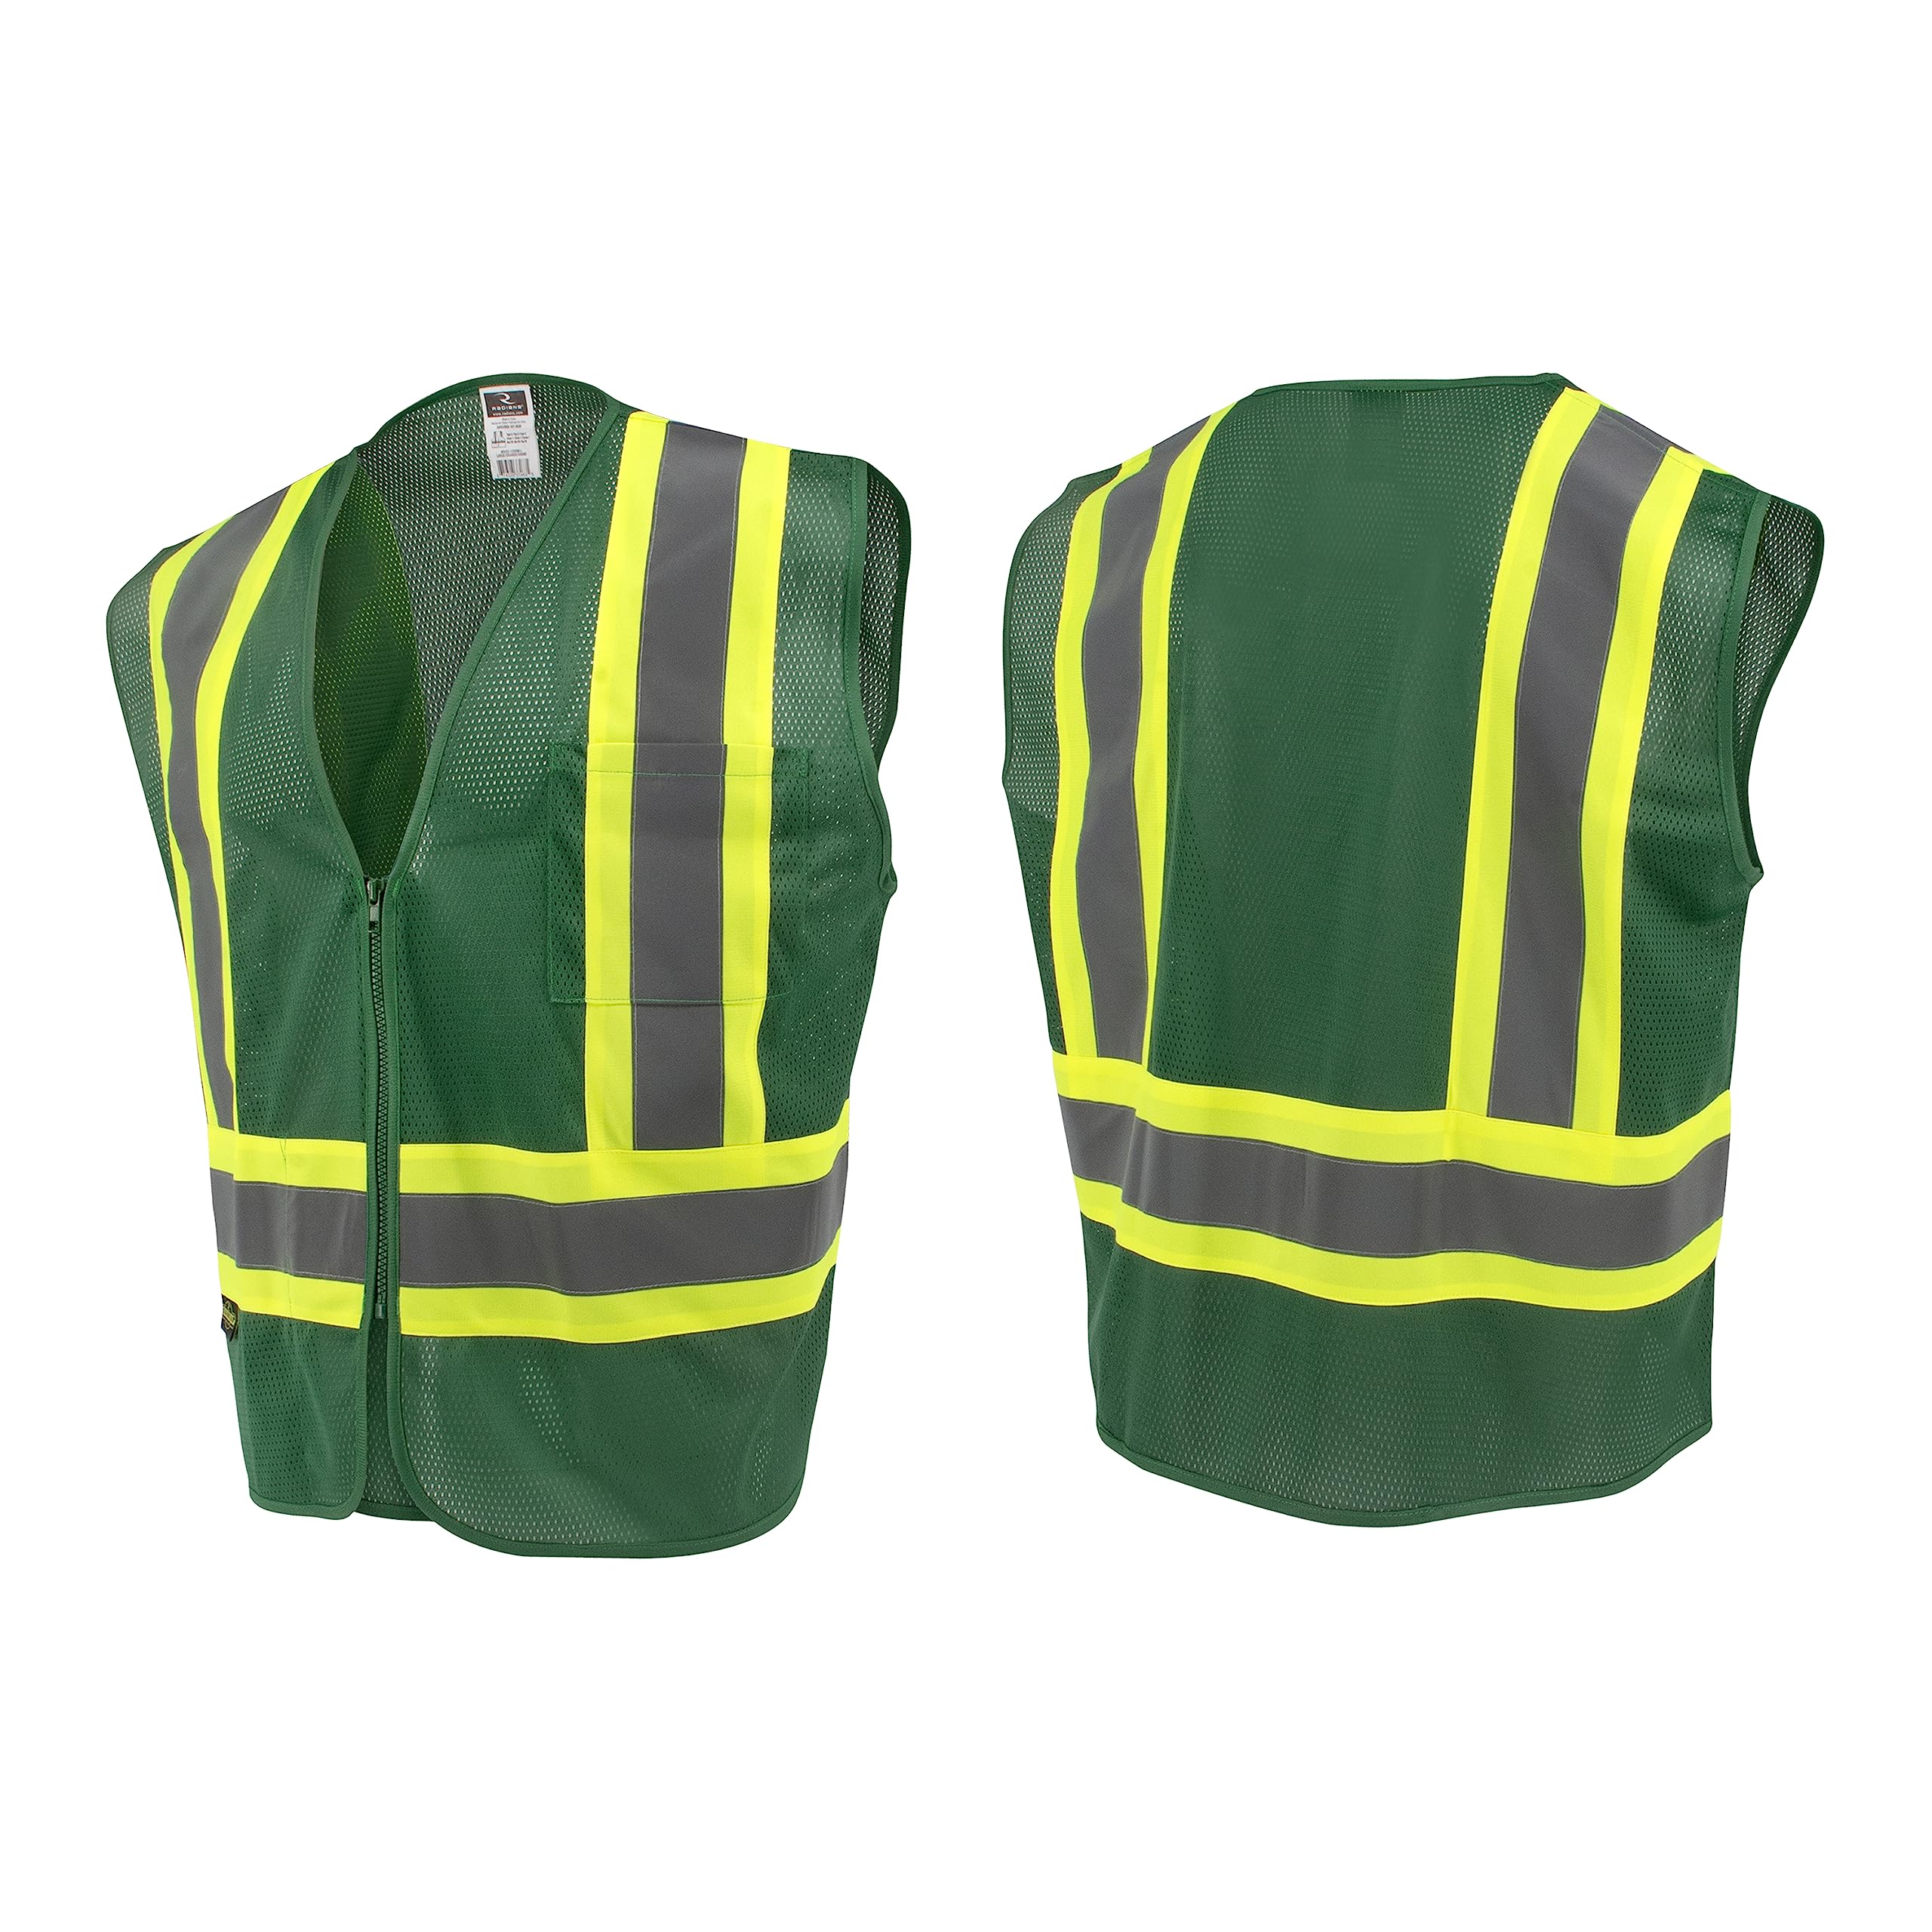 Radians SV22-1 Economy Type O Class 1 Safety Vest Size Large, Hunter Green Mesh with Contrasting Tape - 1 Each